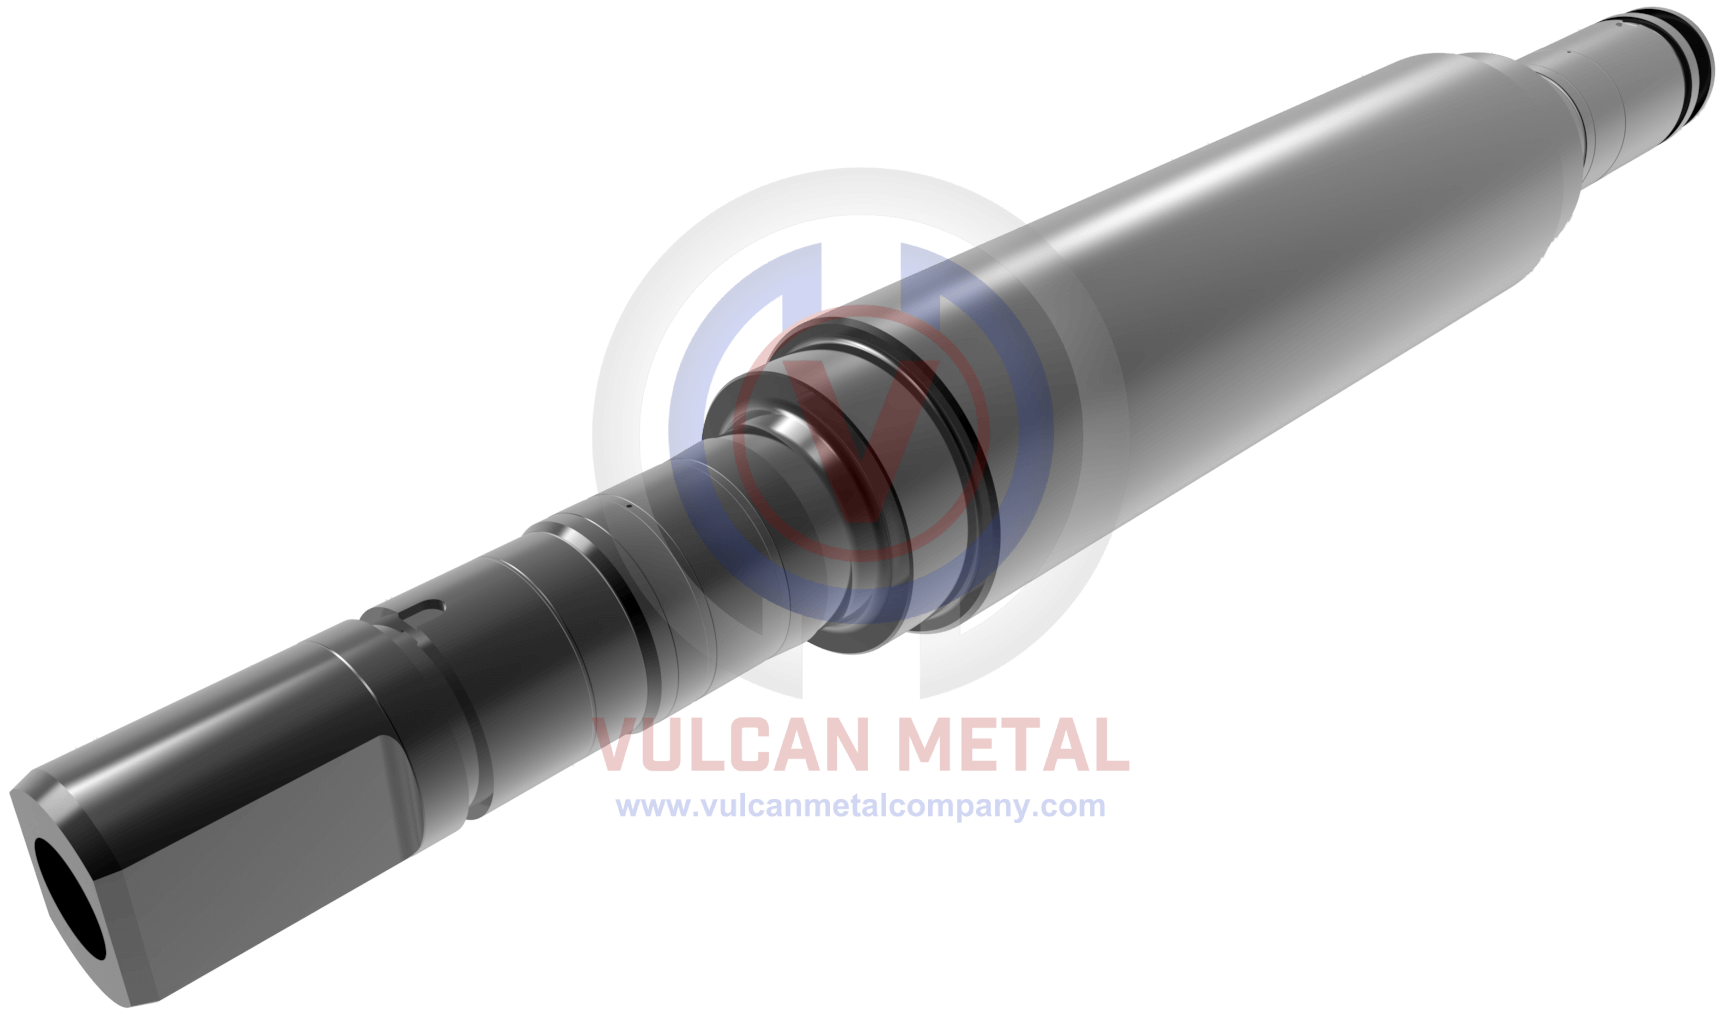 Vulcan Metal Roll, Vulcan Metal Rolls, Vulcan Metal Cylindre, Vulcan Metal Cylindres, VMC Roll, VMC Rolls, Hot Rolling Mill, Cold Rolling Mill, Flat Product Mill, Aluminum Mill, Cold Rolled Product, Hot Rolled Product, Bloom Mill, Billet Mill, Slabbing Mill, Cold Plate Mill, Hot Plate Mill, Cold Skin Pass Mill, Hot Skin Pass Mill, Galvanizing Line, Heavy Plate Mill, Heavy Section Mill, Hot Strip Mill, Cold Strip Mill, HSM, CSM, Reversing Cold Mill, Sendzimir Mill, Stainless Steel Mill, Stainless Mill, Steckel Mill, Tandem Mill, Tandem Cold Mill, Tandem Hot Mill, Tinplate Mill, Laminoir, Laminoir à Chaud, Laminoir à Froid, Laminage à Chaud, Laminage à Froid, Mill Roll, Rolling Mill Roll, Mill Rolls, Rolling Mill Rolls, Rolling Roll, Rolling Rolls, Edger Roll, Straightener Roll, Universal Roll, Roughing Roll, Rougher Roll, Intermediate Rolls, Prefinishing Roll, Leader Roll, Finishing Roll, Cast Roll, Roll, Spun Cast Roll, Centrifugal Cast Roll, Work Roll, Adamite Roll, Acicular Roll, Pearlitic Roll, Steel Roll, Iron Roll, Ferritic Roll, Alloyed Roll, SG Iron Roll, Edger Rolls, Straightener Rolls, Universal Rolls, Roughing Rolls, Rougher Rolls, Intermediate Rolls, Prefinishing Rolls, Leader Rolls, Finishing Rolls, Cast Rolls, Rolls, Spun Cast Rolls, Centrifugal Cast Rolls, Work Rolls, Adamite Rolls, Acicular Rolls, Pearlitic Rolls, Steel Rolls, Iron Rolls, SG Iron Rolls, Ferritic Rolls, Alloyed Rolls, Edger Ring, Straightener Ring, Universal Ring, Roughing Ring, Rougher Ring, Intermediate Rings, Prefinishing Ring, Leader Ring, Finishing Ring, Cast Ring, Ring, Spun Cast Ring, Centrifugal Cast Ring, Work Ring, Adamite Ring, Acicular Ring, Pearlitic Ring, Steel Ring, Iron Ring, Ferritic Ring, Alloyed Ring, SG Iron Ring, Edger Rings, Straightener Rings, Universal Rings, Roughing Rings, Rougher Rings, Intermediate Rings, Prefinishing Rings, Leader Rings, Finishing Rings, Cast Rings, Rings, Spun Cast Rings, Centrifugal Cast Rings, Work Rings, Adamite Rings, Acicular Rings, Pearlitic Rings, Steel Rings, Iron Rings, SG Iron Rings, Ferritic Rings, Alloyed Rings, Edger Sleeve, Straightener Sleeve, Universal Sleeve, Roughing Sleeve, Rougher Sleeve, Intermediate Sleeves, Prefinishing Sleeve, Leader Sleeve, Finishing Sleeve, Cast Sleeve, Sleeve, Spun Cast Sleeve, Centrifugal Cast Sleeve, Work Sleeve, Adamite Sleeve, Acicular Sleeve, Pearlitic Sleeve, Steel Sleeve, Iron Sleeve, Ferritic Sleeve, Alloyed Sleeve, SG Iron Sleeve, Edger Sleeves, Straightener Sleeves, Universal Sleeves, Roughing Sleeves, Rougher Sleeves, Intermediate Sleeves, Prefinishing Sleeves, Leader Sleeves, Finishing Sleeves, Cast Sleeves, Sleeves, Spun Cast Sleeves, Centrifugal Cast Sleeves, Work Sleeves, Adamite Sleeves, Acicular Sleeves, Pearlitic Sleeves, Steel Sleeves, Iron Sleeves, SG Iron Sleeves, Ferritic Sleeves, Alloyed Sleeves, Cylindre, Cylindres, Cylindre Coulé, Cylindre Coulés, Cylindre Coulés, Cilindro, Cilindri, Walze, Walzewerk, Walzen, Galet, Galets, Galet Coulé, Galet Coulés, Galet Coulés, Bague, Bagues, Bague Coulé, Bague Coulés, Bague Coulés, Cylindre Refouleur, Cylindres Refouleurs, HSM Roll, CSM Roll, HSM Ring, CSM Ring, Cylindre de Laminage, Cylindres de Laminage, Cylindre de Laminoir, Cylindres de Laminoir, Arbor, Arbour, Shaft, Cast Arbor, Cast Arbour, Cast Shaft, Arbors, Arbours, Shafts, Cast Arbors, Cast Arbours, Cast Shafts, Edging Stand, Straightening Stand, Universal Stand, Roughing Stand, Intermediate Stand, Prefinishing Stand, Leader Stand, Finishing Stand, Backup Stand, Work Stand, Edging Stands, Straightening Stands, Universal Stands, Roughing Stands, Intermediate Stands, Prefinishing Stands, Leader Stands, Finishing Stands, Backup Stands, Work Stands, Rolling Mill, Laminoir, Cylindre Laminage, Roll, Ring, Bague, Shaft, Arbour, Arbre, Arbor, Cast Iron, Cast Steel, Pearlitic Nodular Iron, Acicular Nodular Iron, Alloy Indefinite Chill, Alloy Cast Steel, Adamite, Graphitic Cast Steel, Ferritic Nodular Cast Iron, SGA, SGP, ACS, AIC, GST, SGF, SGX, FNA, FNP, Fonte Nodulaire Perlitique, Fonte Nodulaire Aciculaire, Acier Coule, Acier Coulé Allié, HSS, semi HSS, semi-HSS, high-chromium, high-chromium iron, high-chromium steel, hicr, hi-cr, high chrome, high chrome iron, high chrome steel, high-chrome iron, high-chrome steel, high-chrome, ICDP, Indefinite Chill Double Poured, Carbide Enhanced High Chrome Iron, Merdane, Merdaneler, Hadde Merdanesi, Hadde Merdaneleri, Döküm Merdane, Çelik Merdane, Demir Merdane, Demir Döküm Merdane, Çelik Döküm Merdane, SG Merdane, SG Döküm Merdane, Santrifuj Merdane, Santrifüj Merdane, Savurma Merdane, Santrifuj Döküm Merdane, Santrifüj Döküm Merdane, Savurma Döküm Merdane, Ring, Ringler, Hadde Ringi, Hadde Ringleri, Döküm Ring, Çelik Ring, Demir Ring, Demir Döküm Ring, Çelik Döküm Ring, SG Ring, SG Döküm Ring, Santrifuj Ring, Santrifüj Ring, Savurma Ring, Santrifuj Döküm Ring, Santrifüj Döküm Ring, Savurma Döküm Ring, Haddehane, Haddehaneler, Haddecilik, Hadde, Sıcak Hadde, Sıcak Haddecilik, Soğuk Hadde, Soğuk Haddecilik, Yassı Mamul, Yassı Ürün, Yassı Mamuller, Yassı Ürünler, Sac, Lama, Sac Haddehanesi